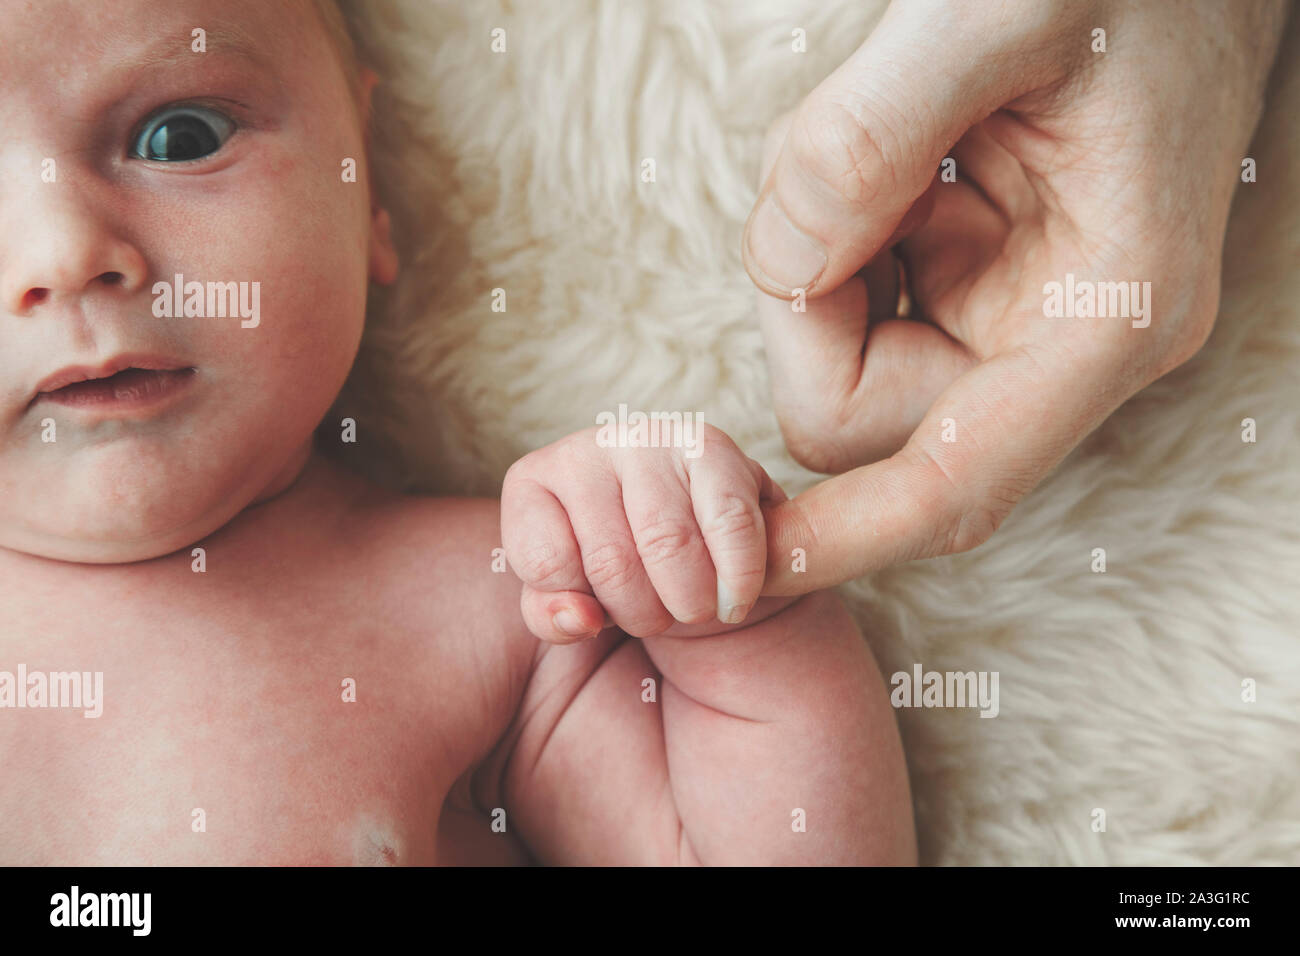 A cute baby holds onto fathers finger. Fatherhood concept Stock Photo